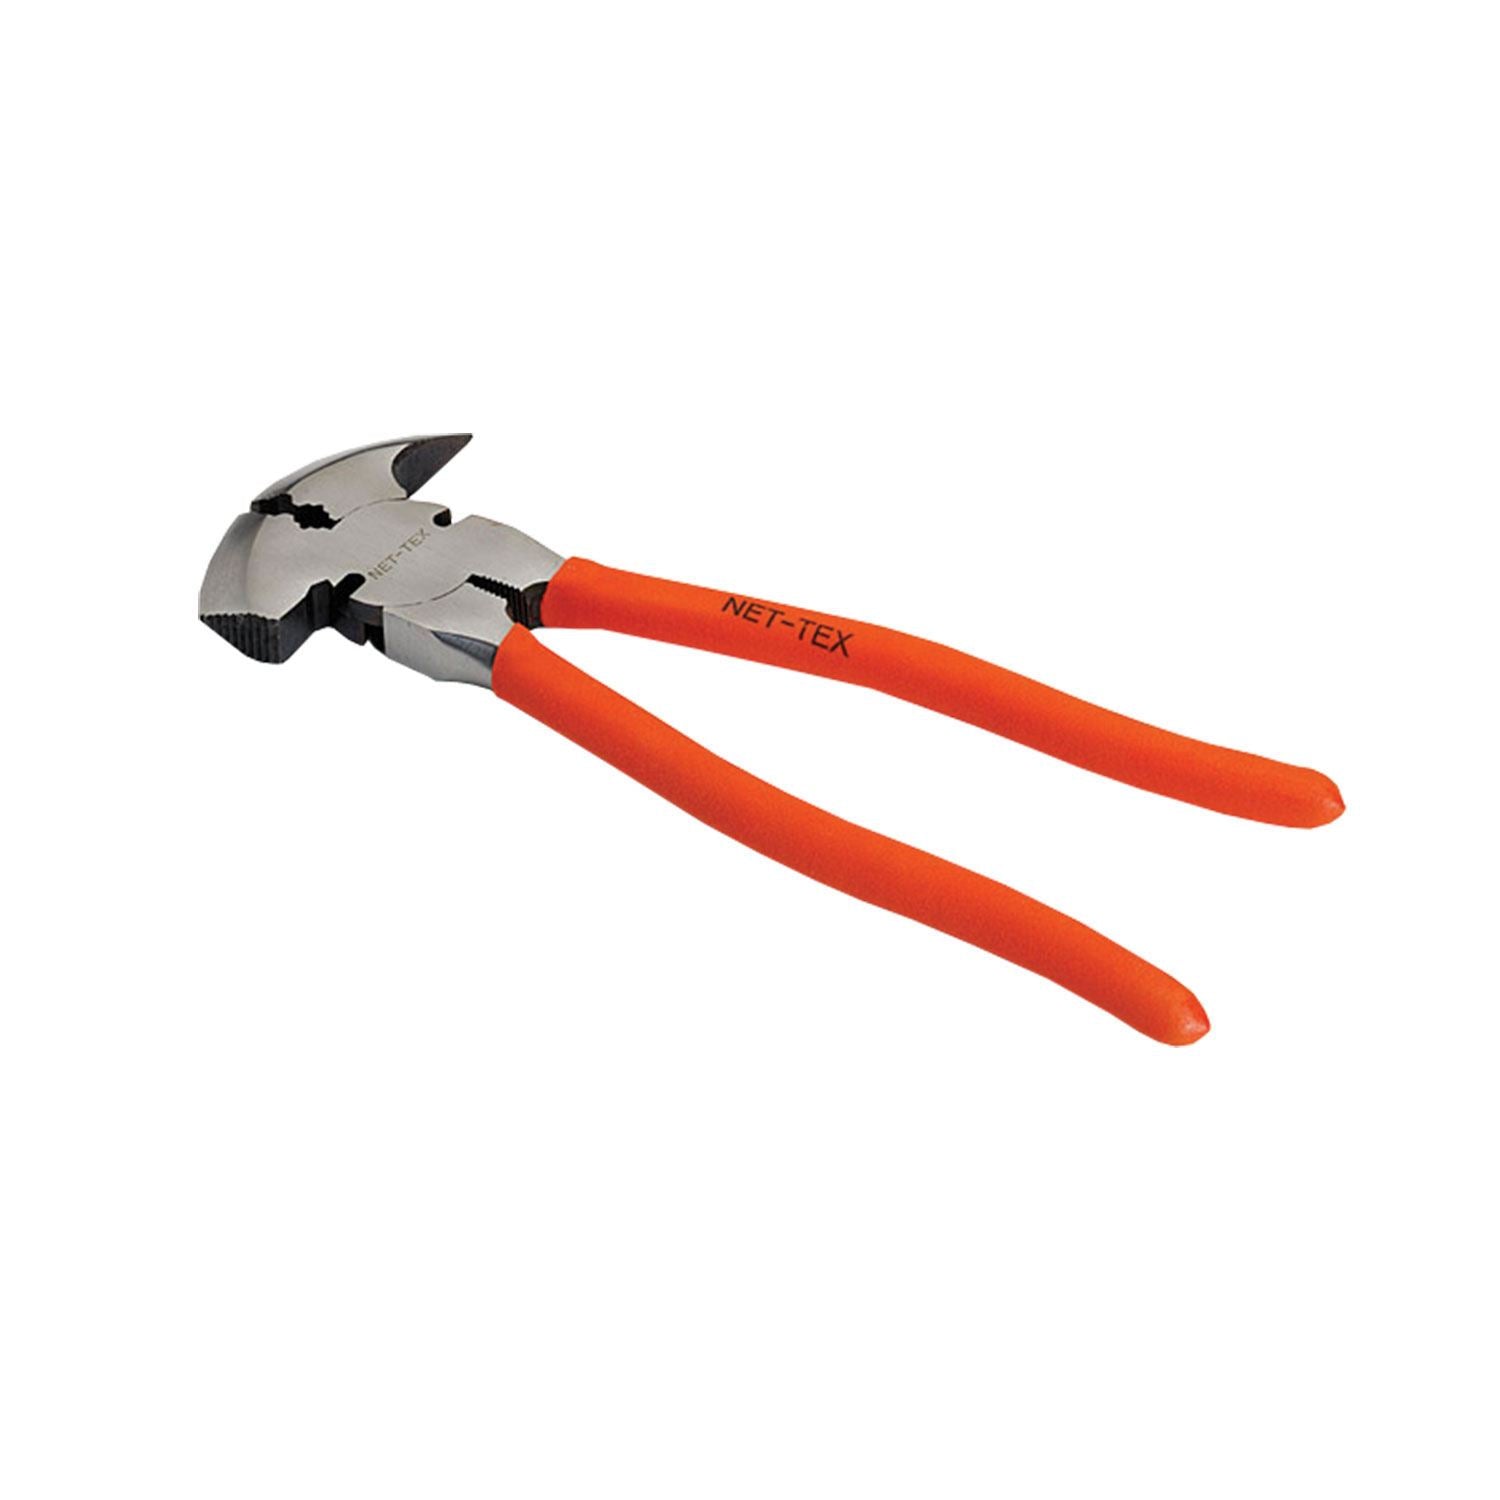 Nettex Myti Fencing Pliers - Just Horse Riders